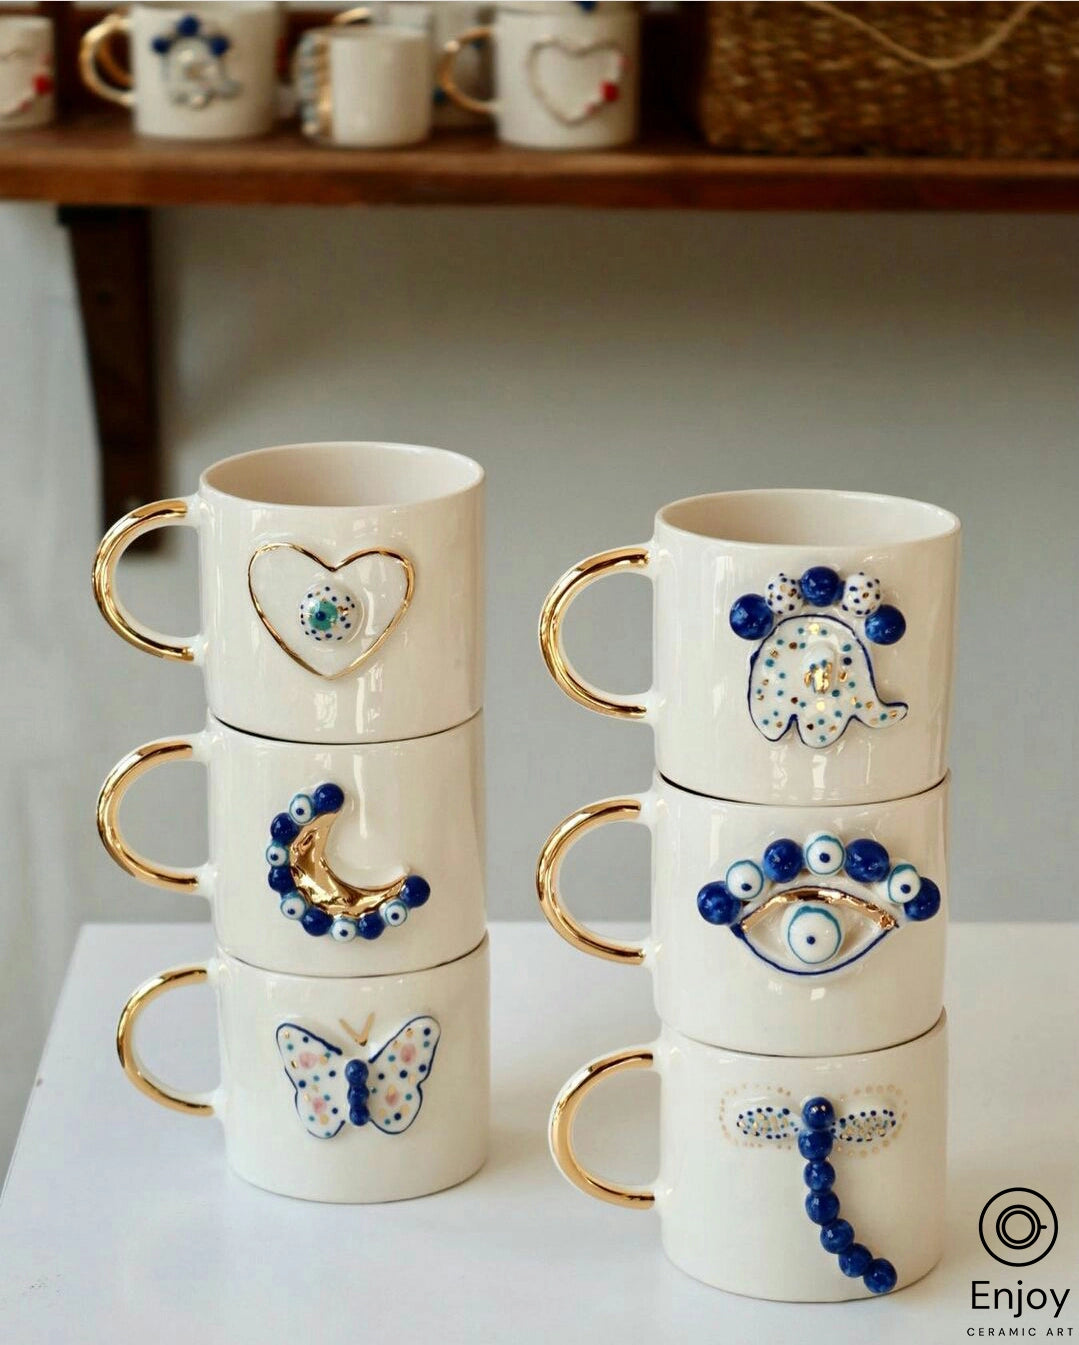 An elegant handmade ceramic espresso cup, featuring a blue crescent moon and evil eye motif, accented with gold on the handle, set against a white interior backdrop. The cup sits on a matching saucer, both with a glossy finish, showcasing artisanal craftsmanship